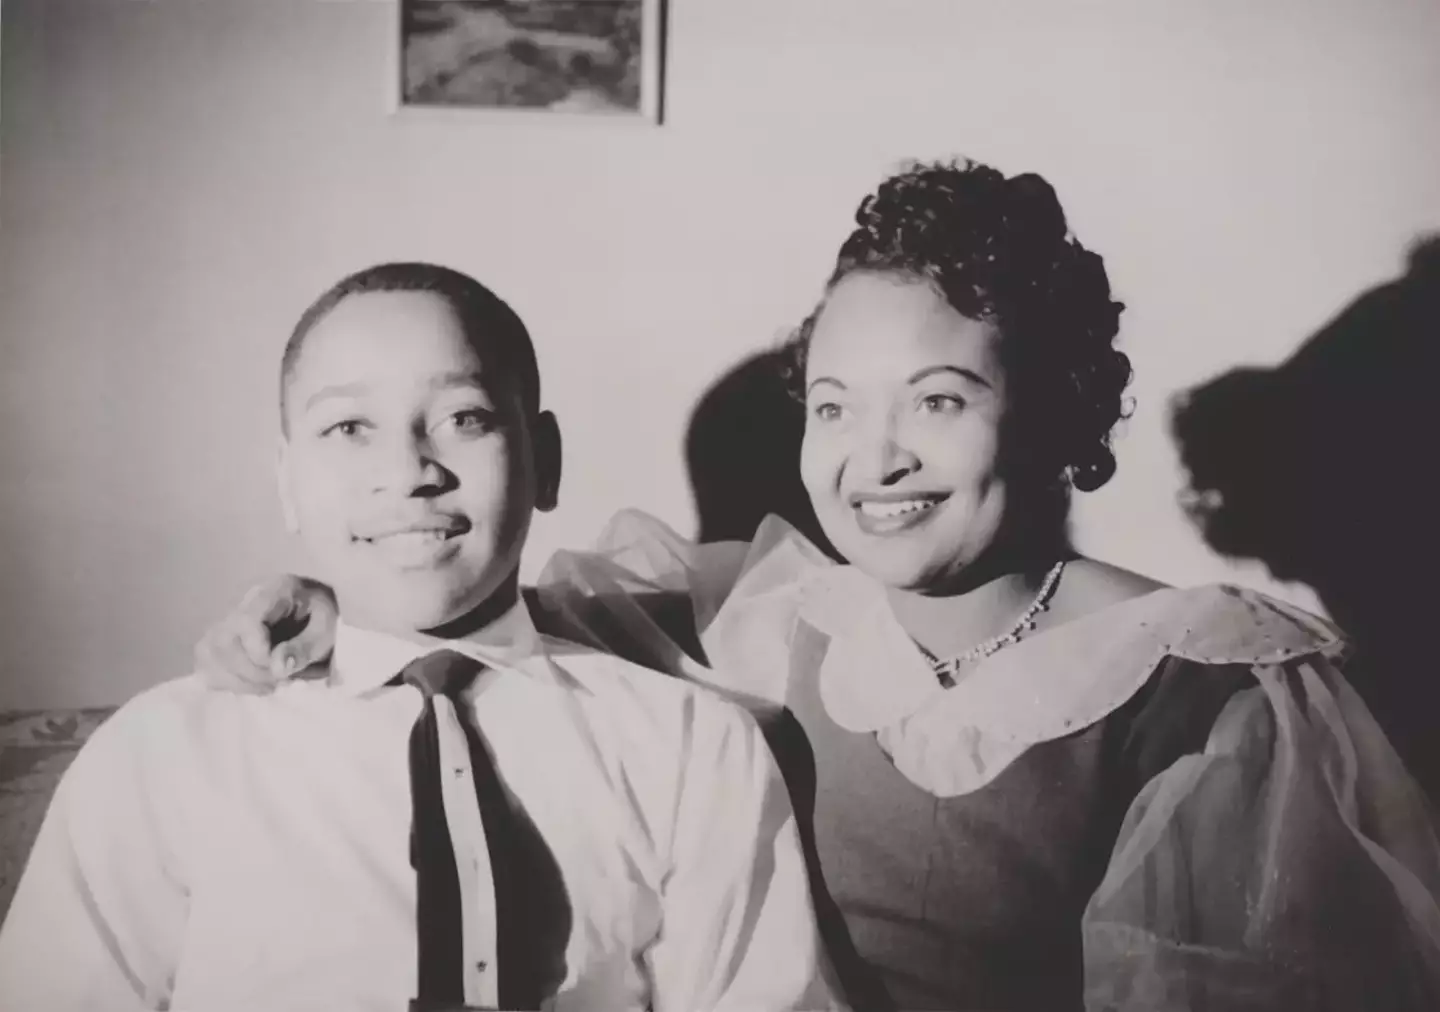 Emmett Till with his mother Mamie.